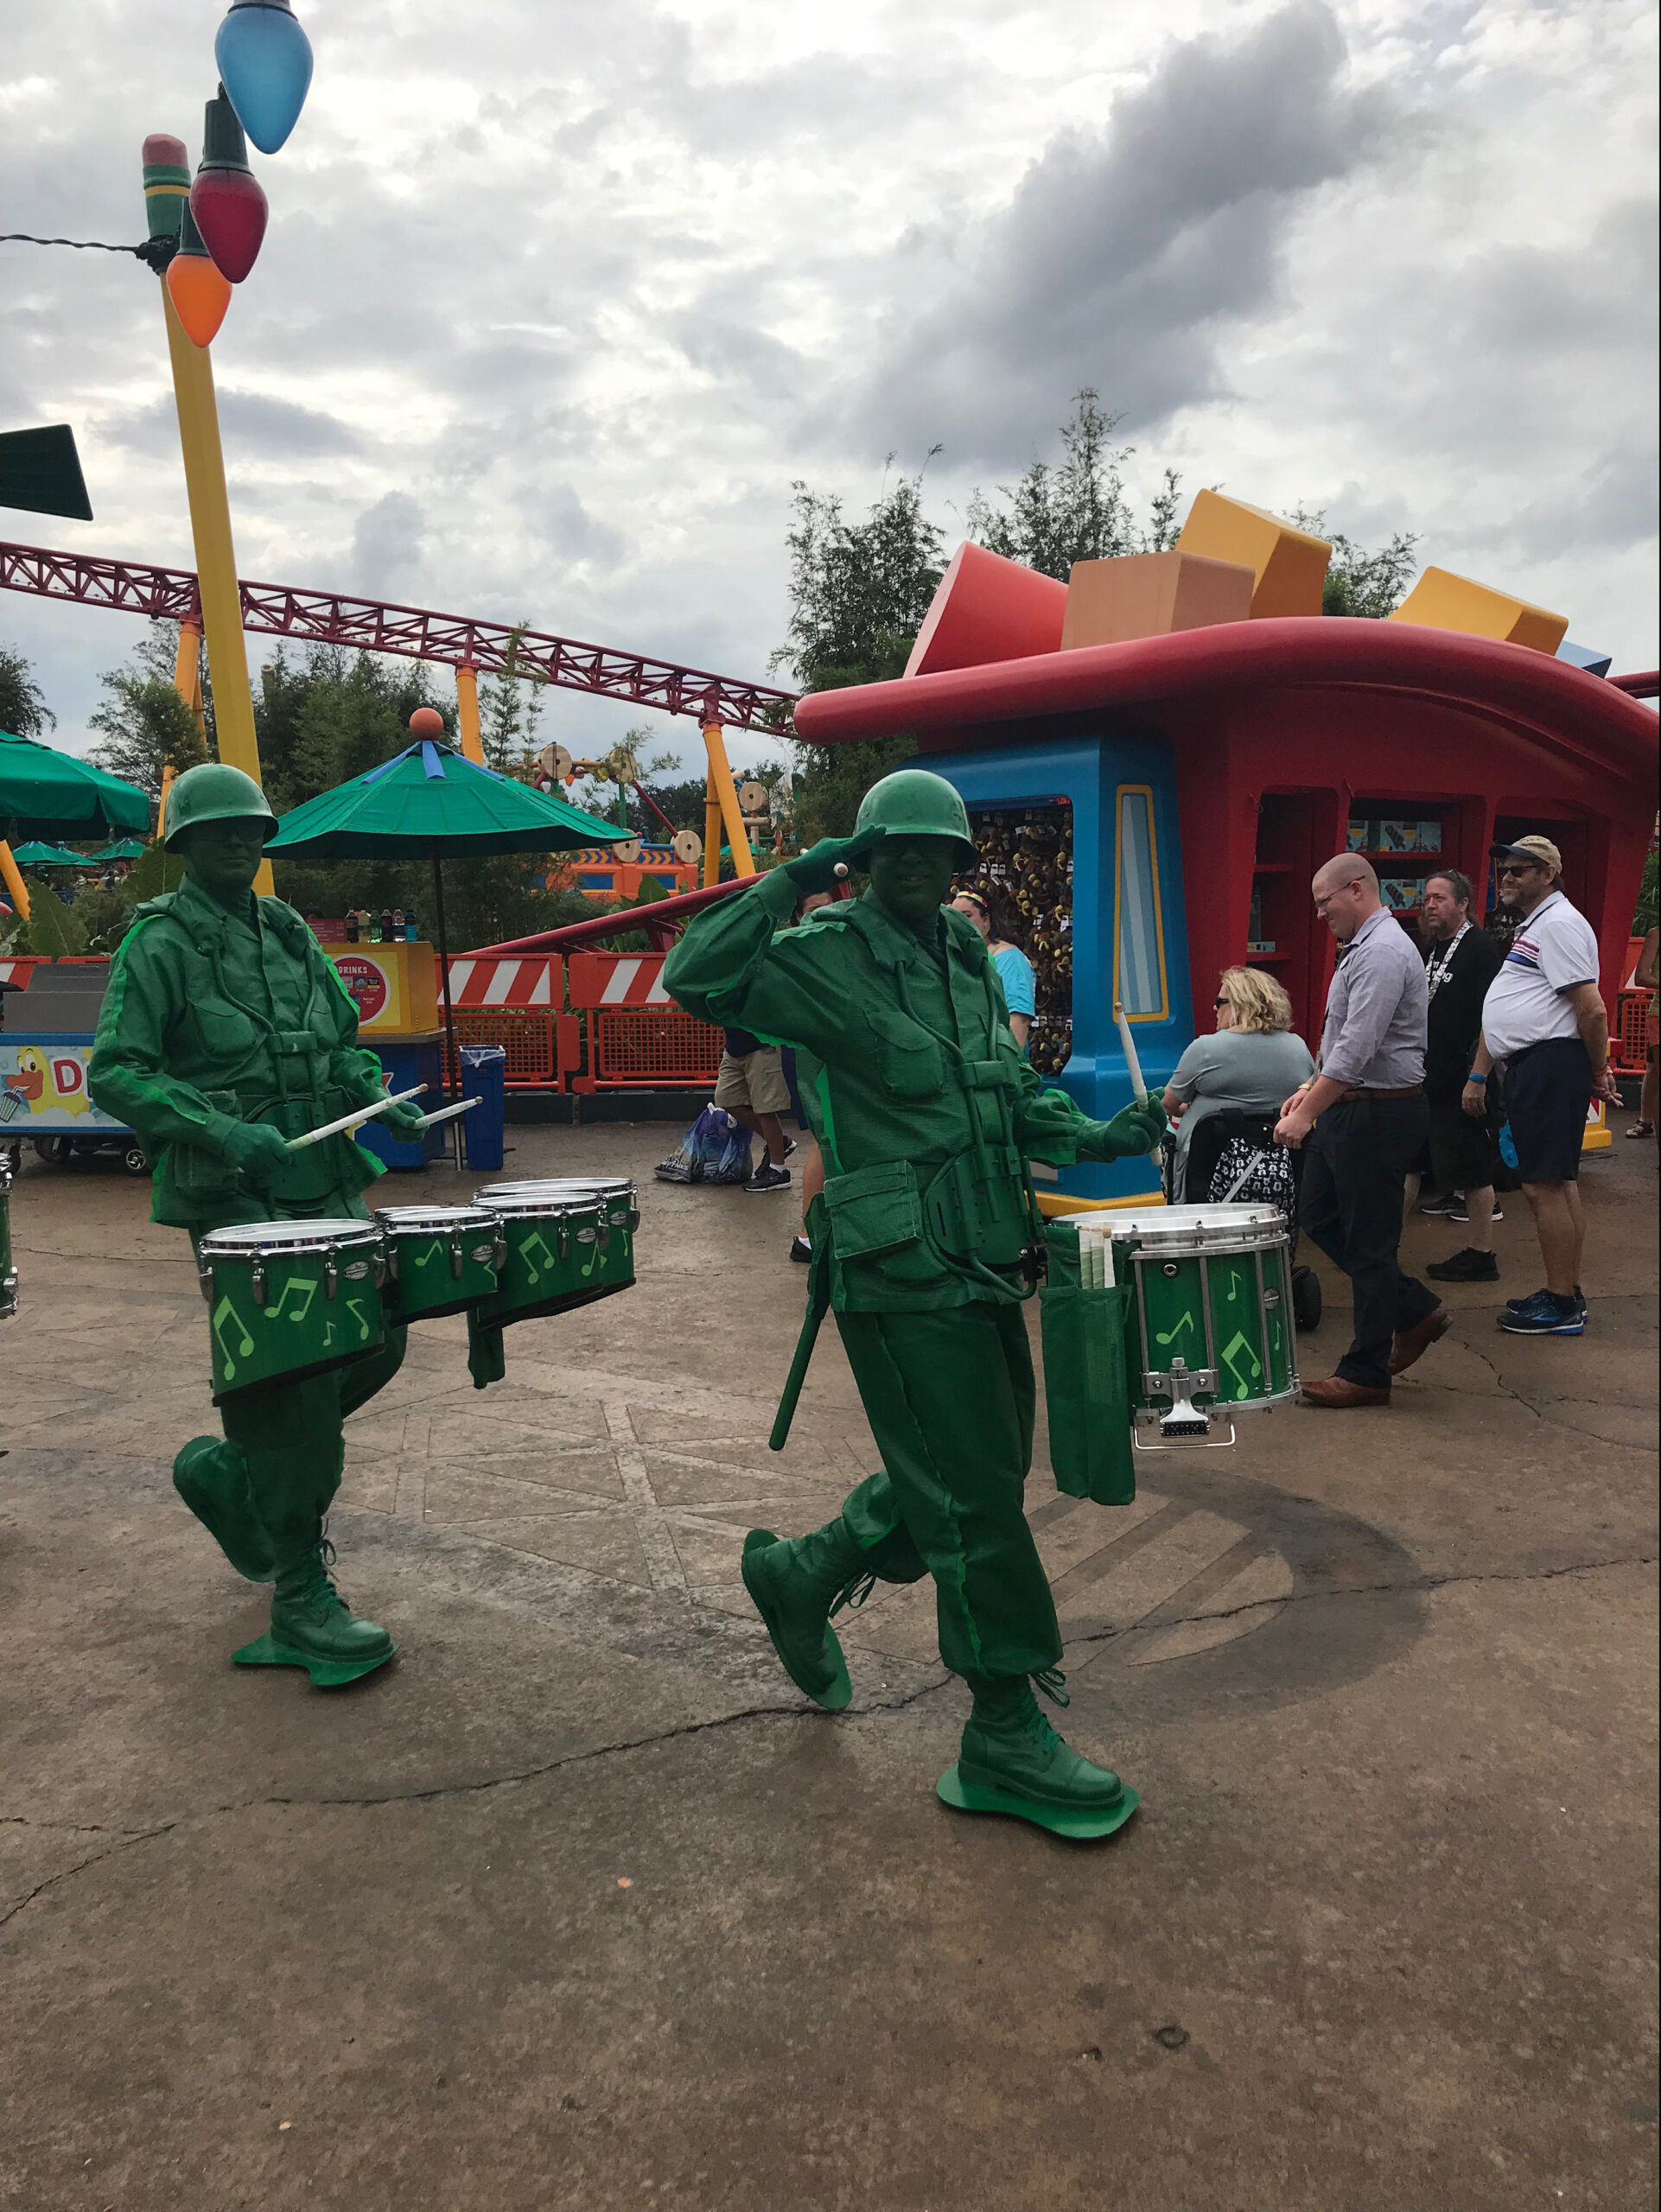 10 Things to Know Before Stepping Foot in TOY STORY LAND!! Toy Story Land TIPS! #disneytips #toystoryland #disneyworldtips #bestdisneytips #disneysecrets #disneyplanning